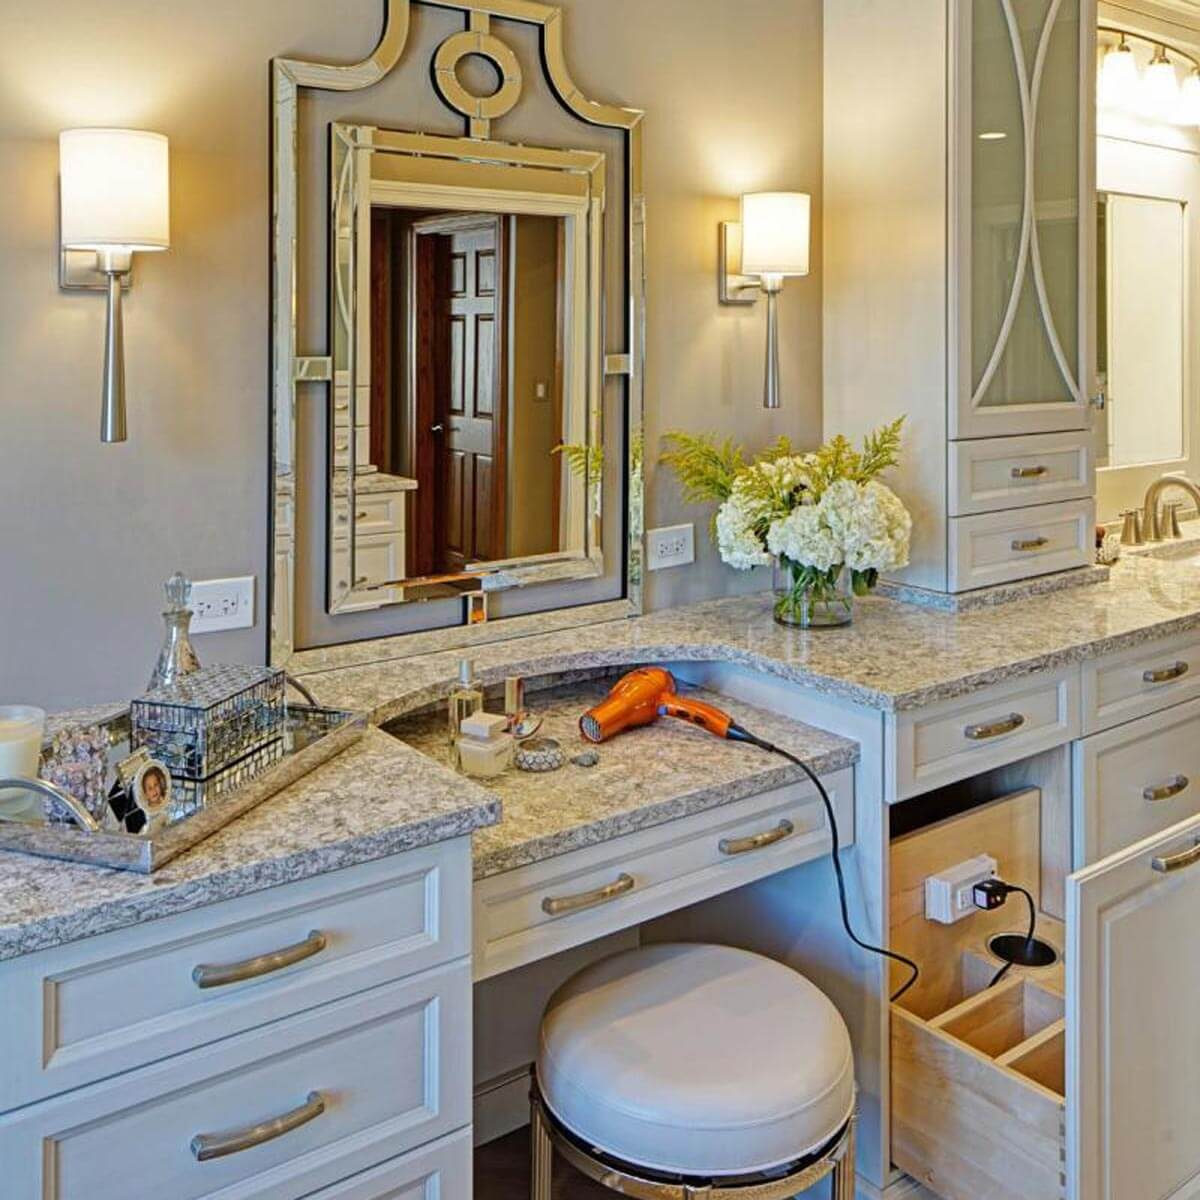 Bathroom Vanity Outlet
 10 Awesome Ideas for a Beauty Vanity — The Family Handyman